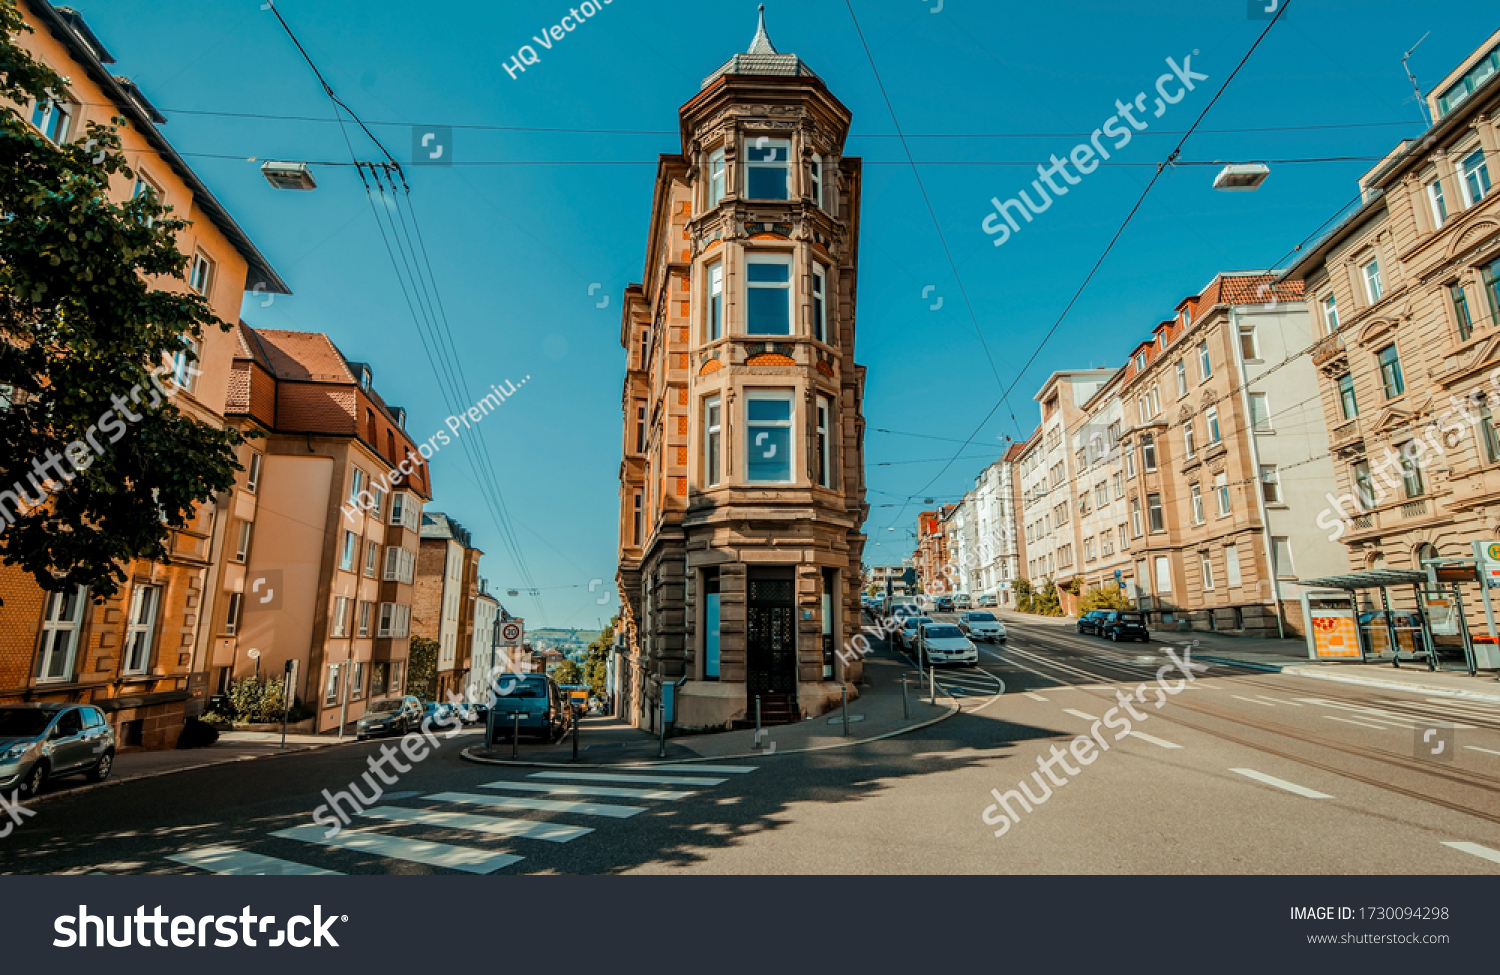 Stuttgart, Germany, June, 2015, Flat building in center of street inside stuttgart city at Eugensplatz square, a popular meeting place for people. Architecture reminding of flatiron building in New Yo #1730094298